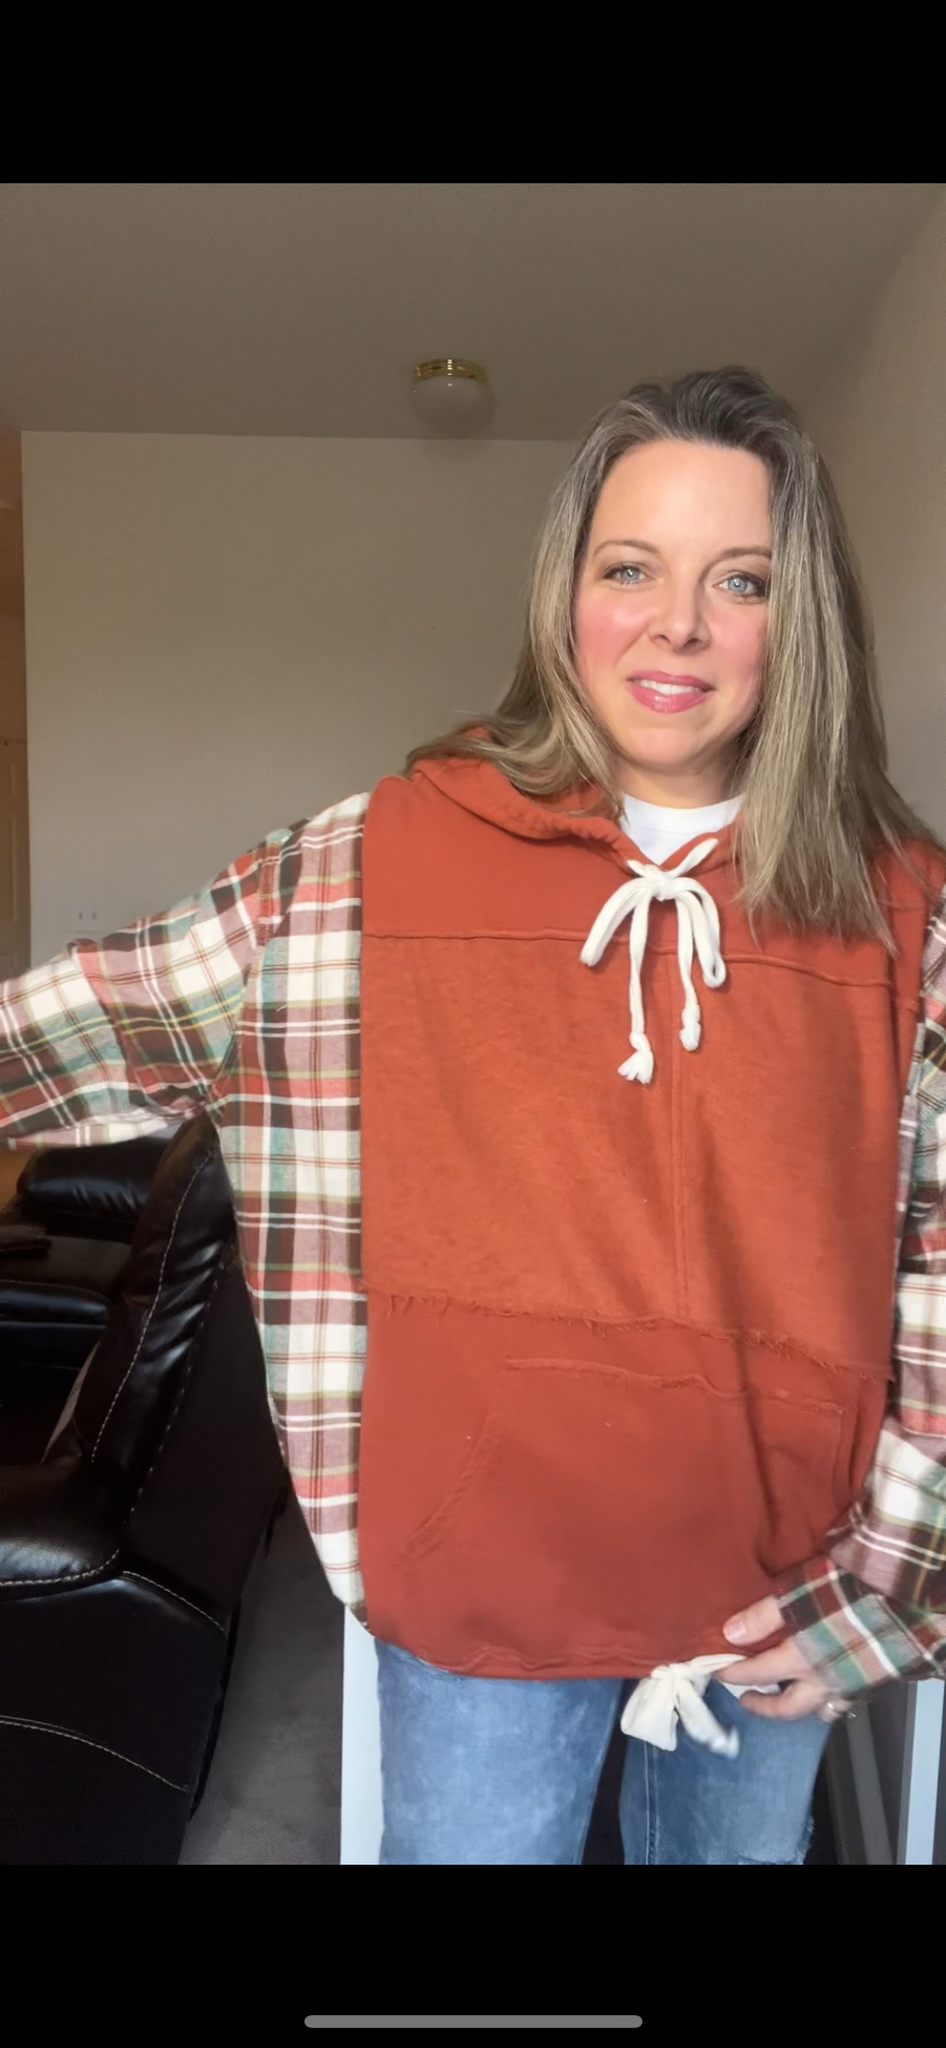 Upcycled Plain orange – women’s XL/1X – midweight sweatshirt with flannel sleeves￼